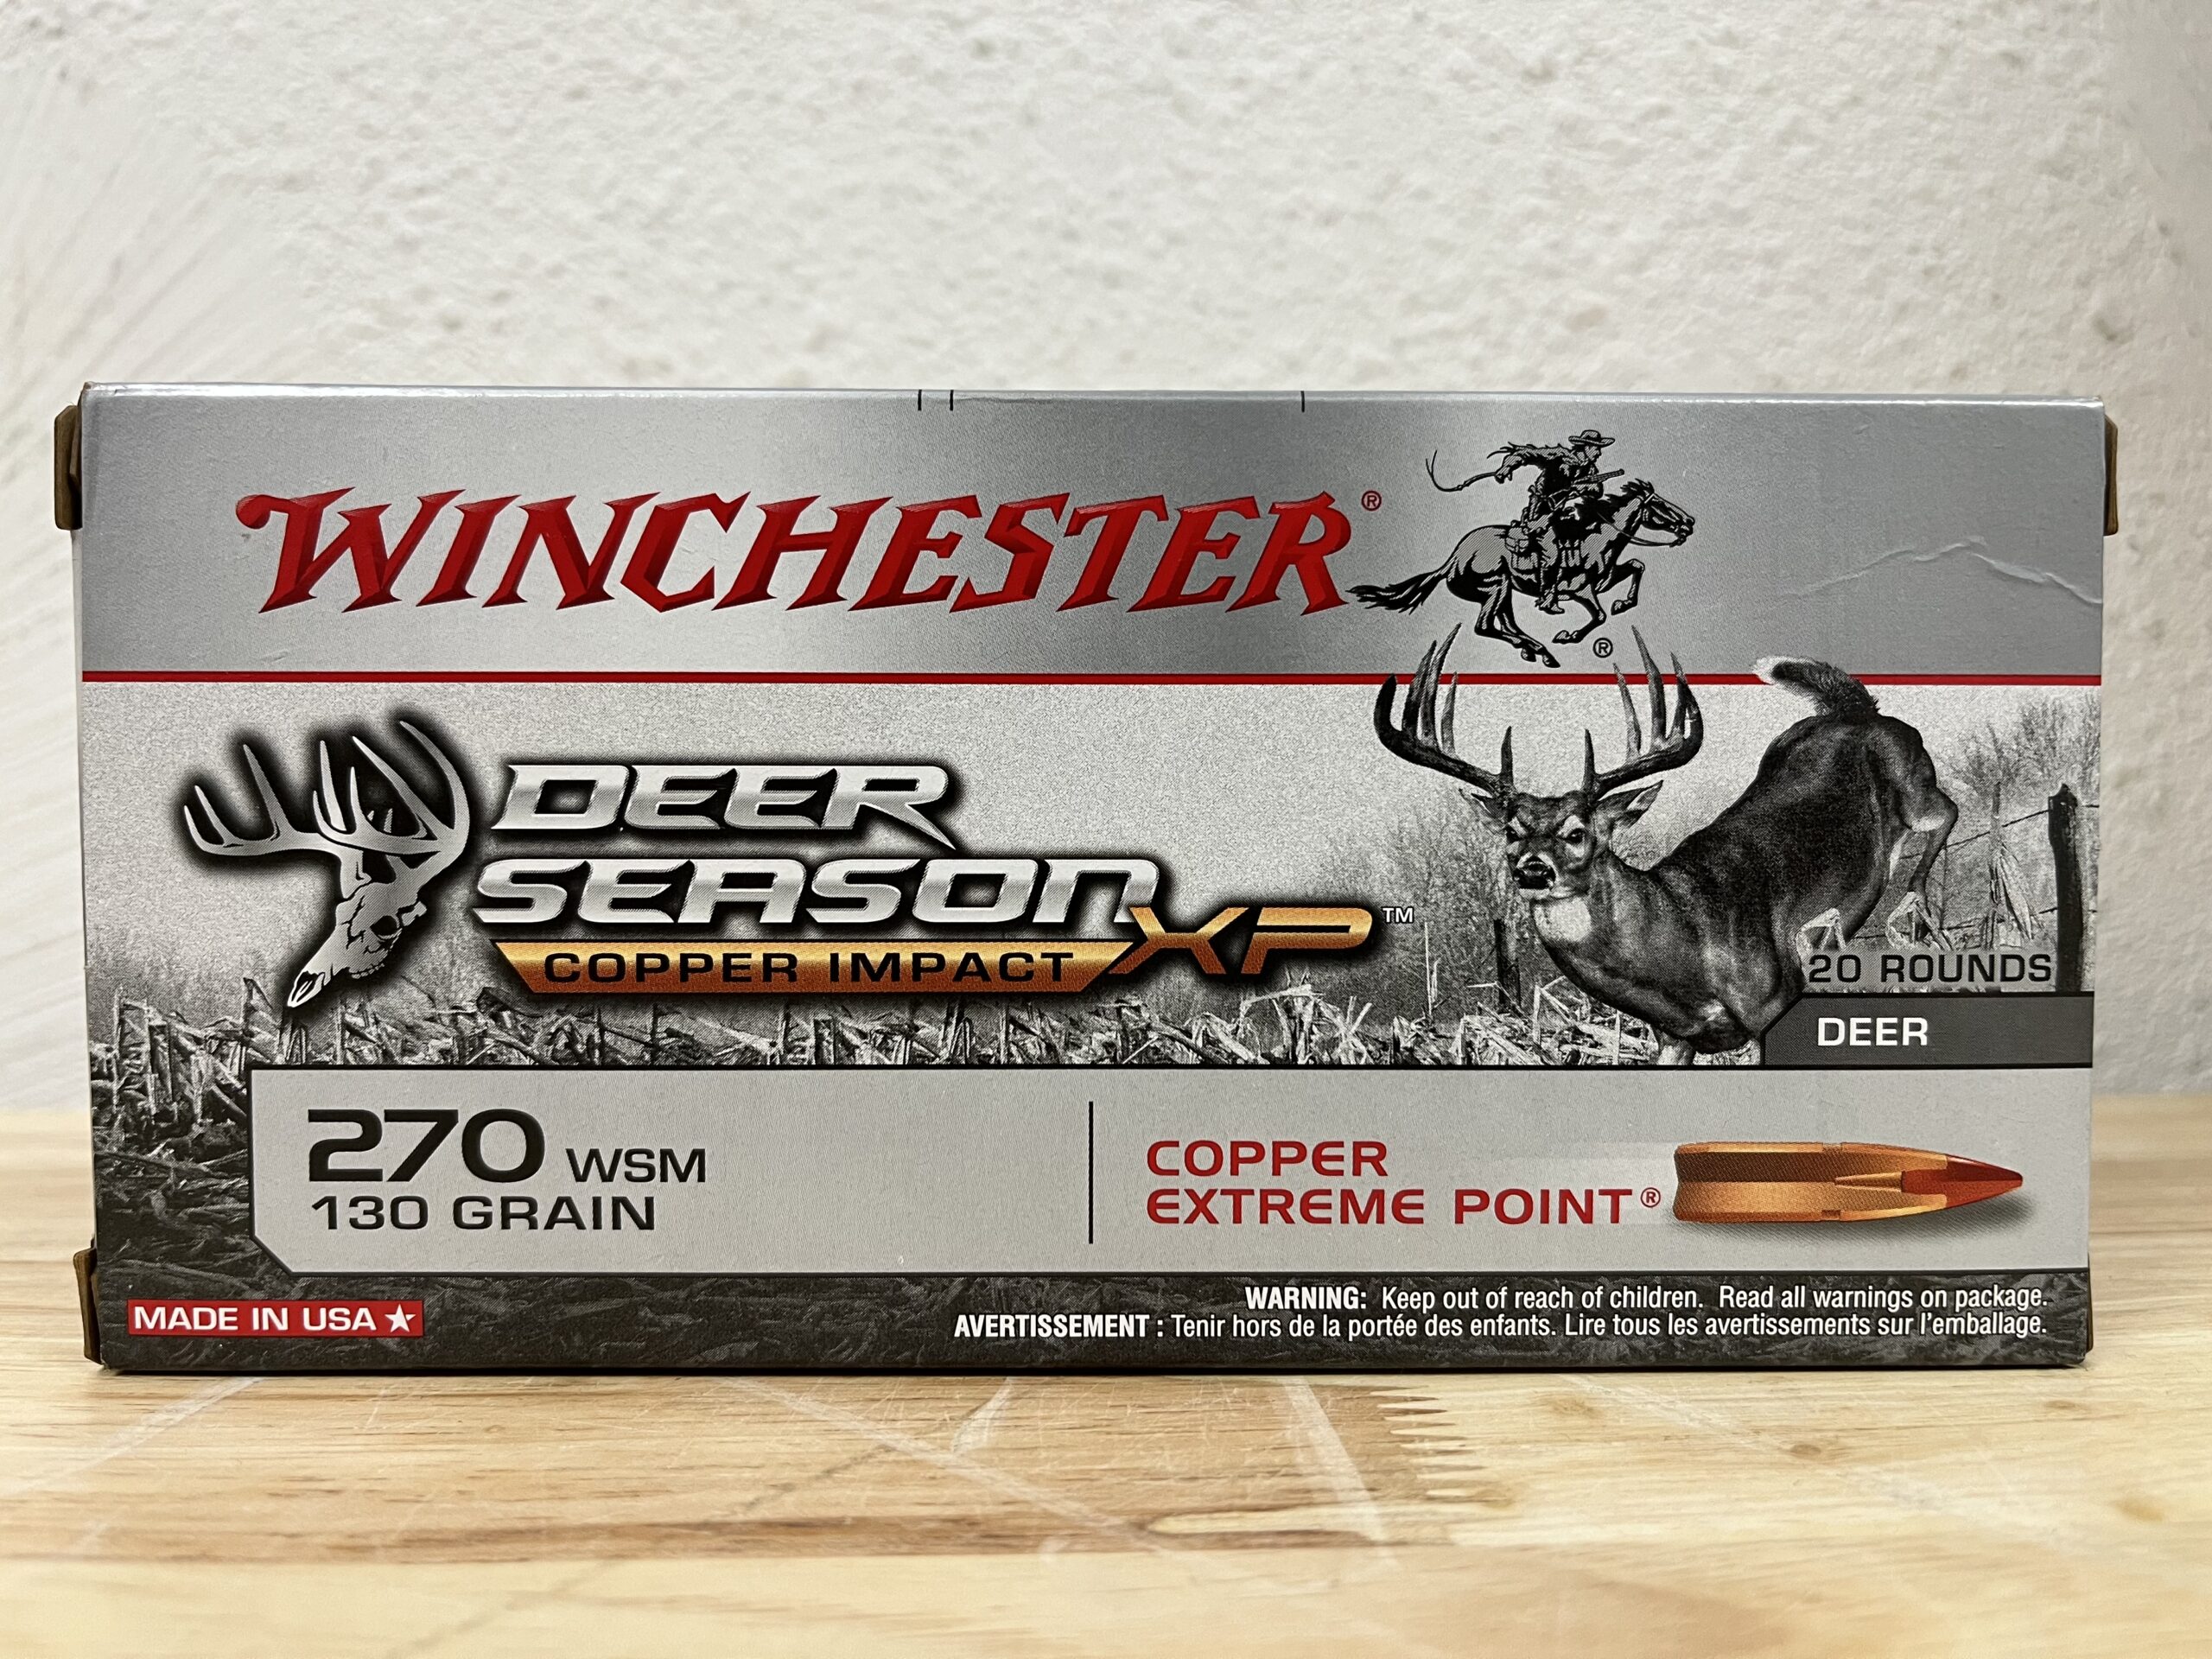 Wsm winchester rounds xp deer grain polymer tipped extreme point season